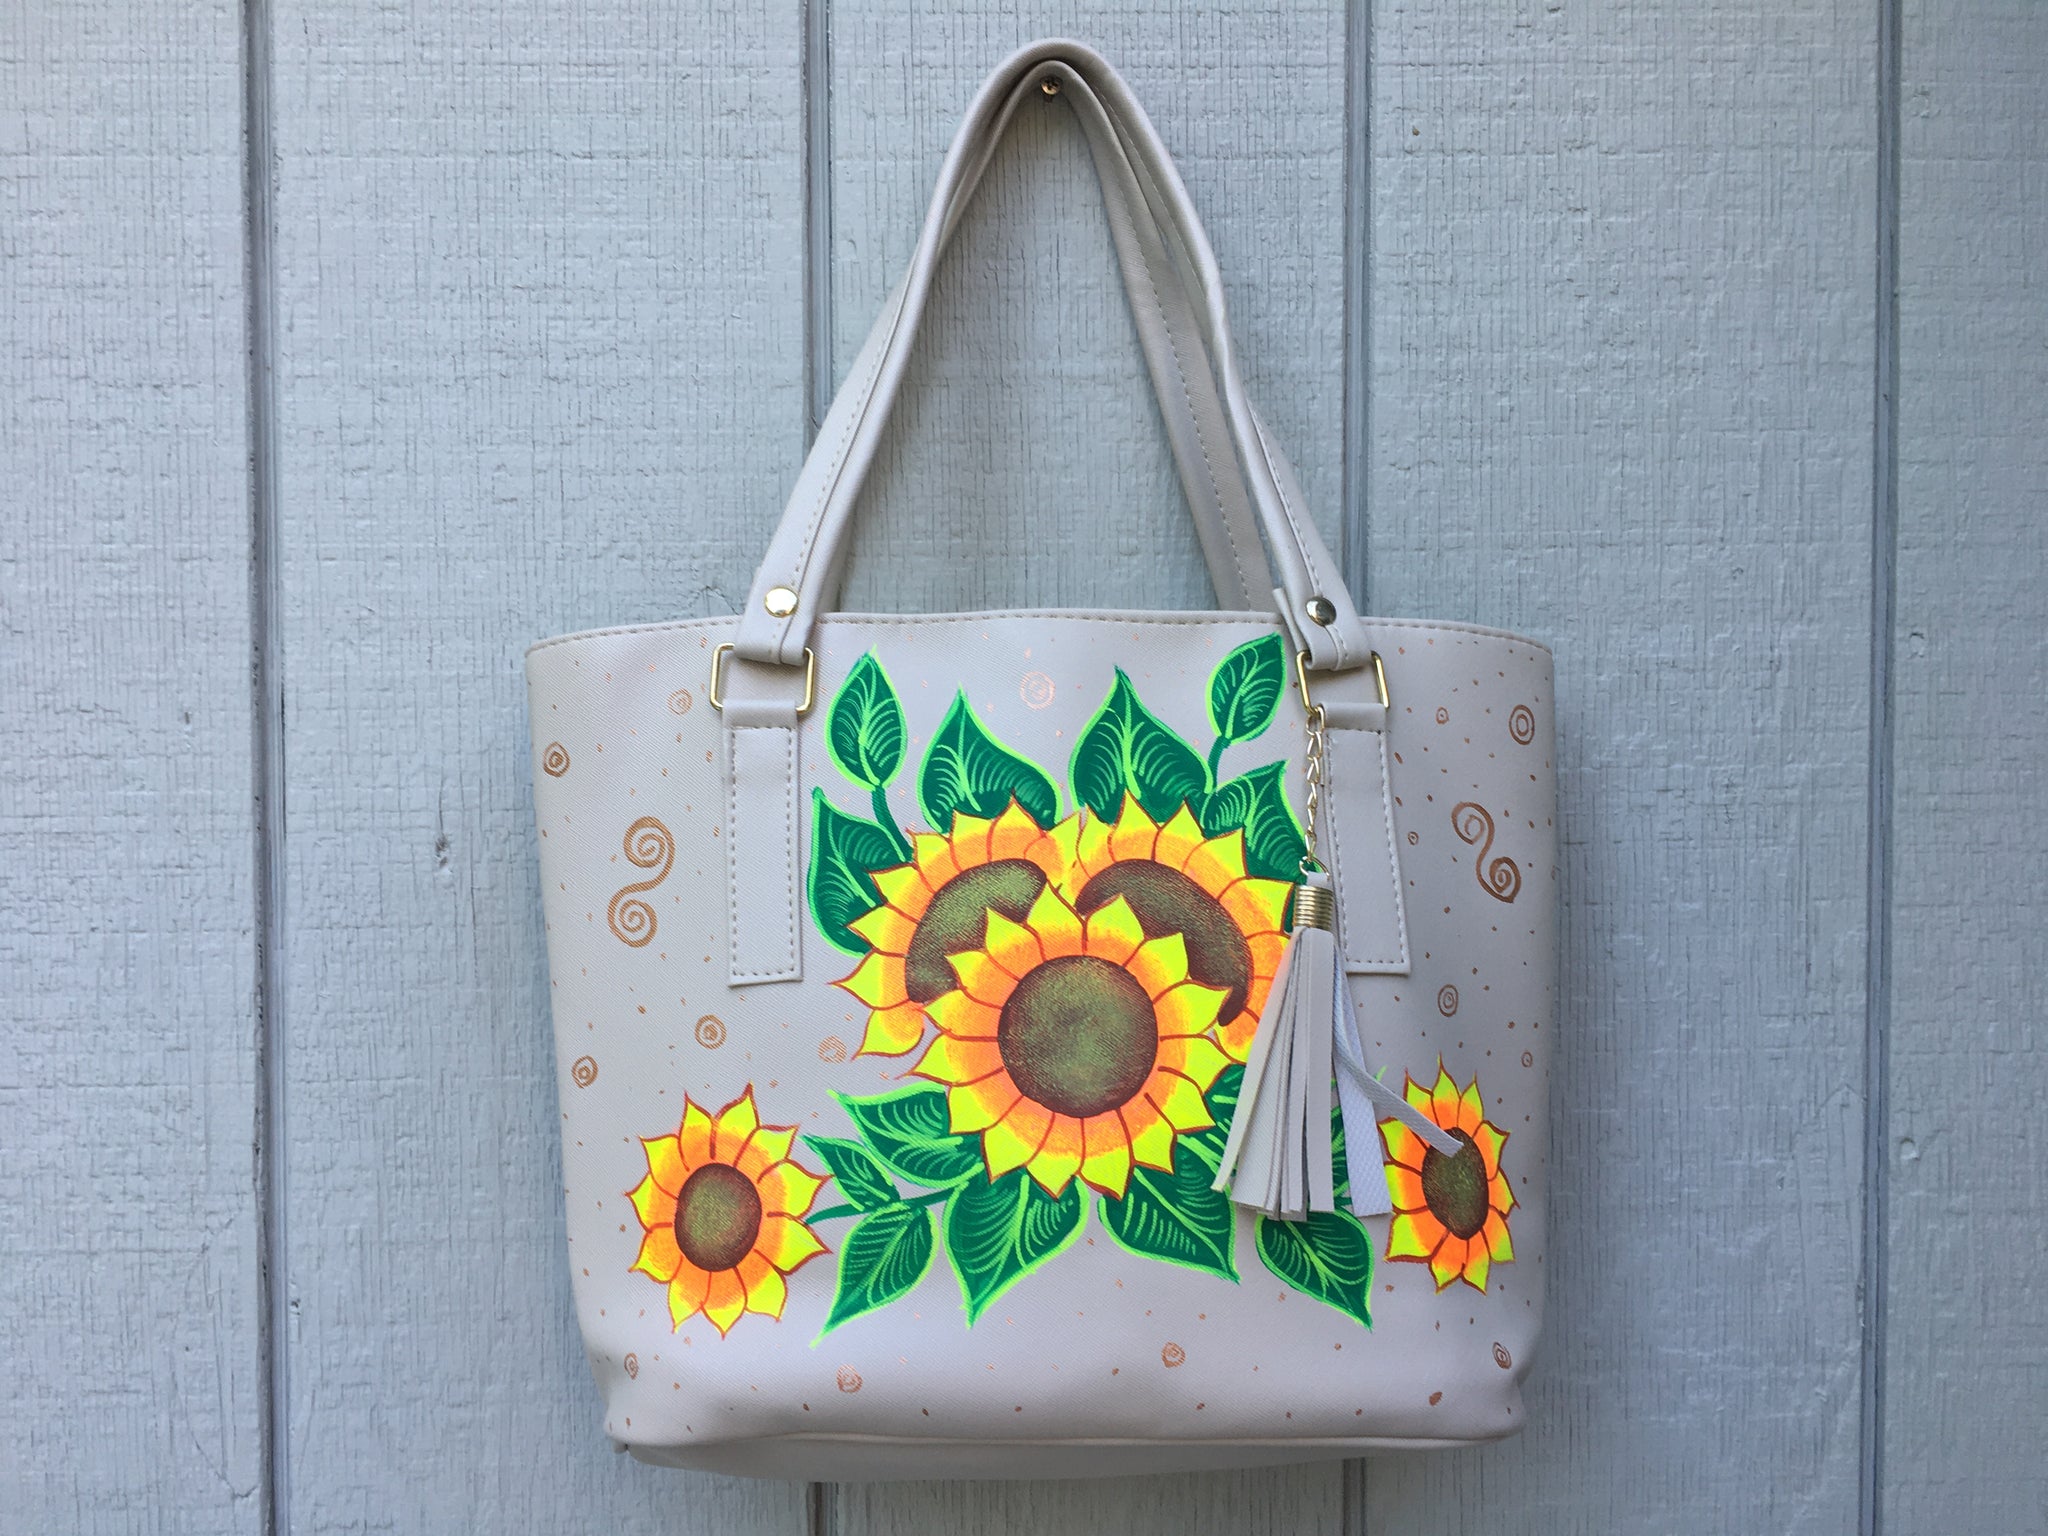 How to paint a thrifted purse - Crafty Chica